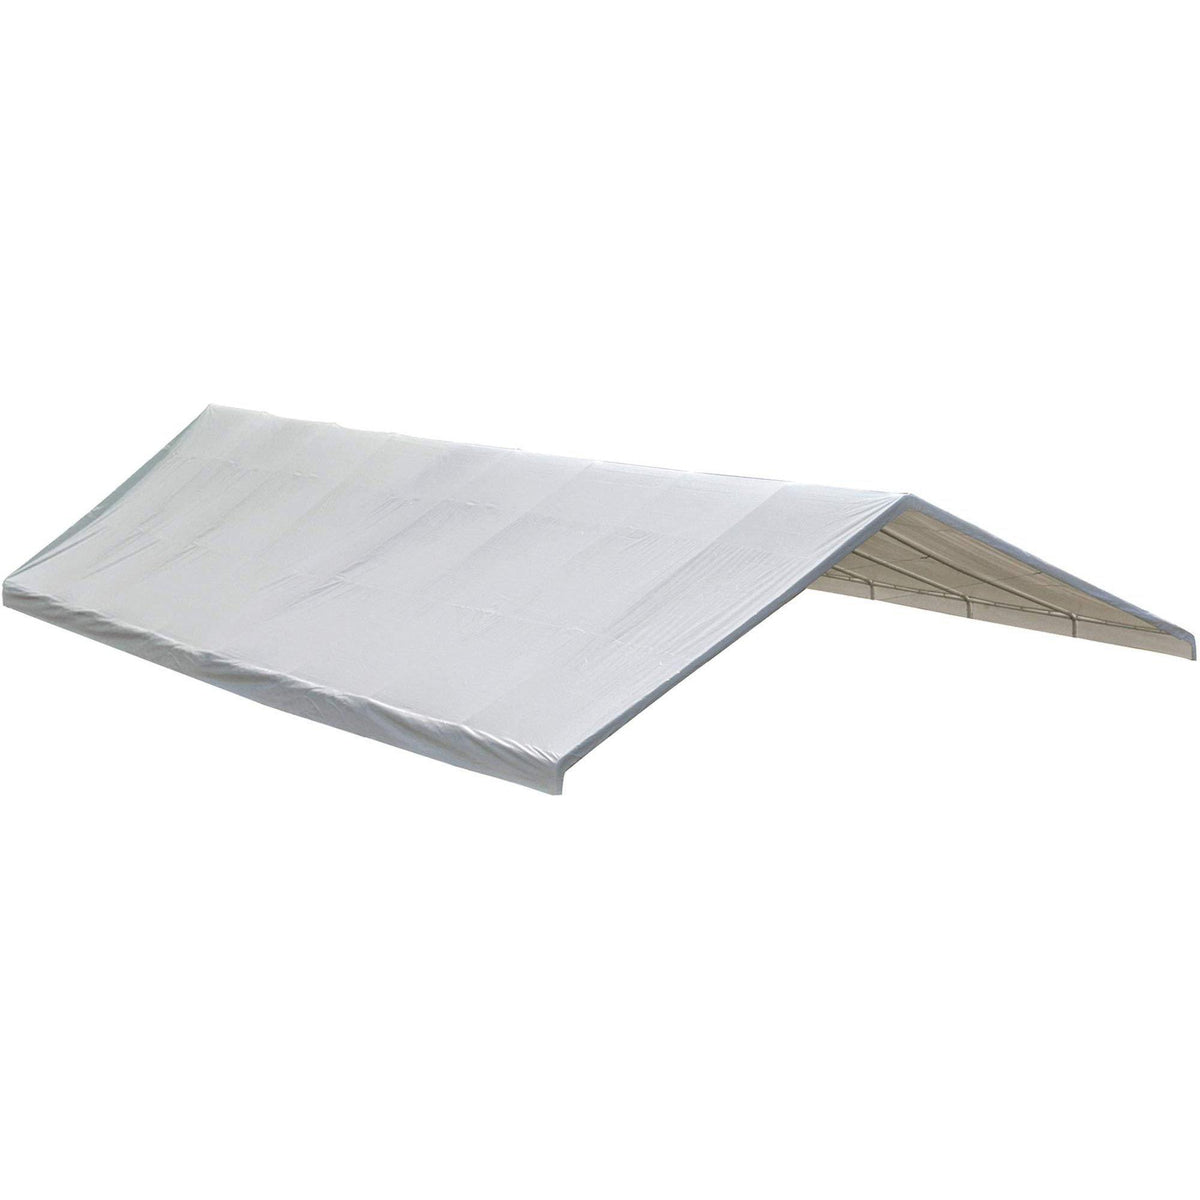 ShelterLogic UltraMax Canopy Replacement Cover, White, 30 x 50 ft. (Canopy Frame and Bungees Sold Separately)